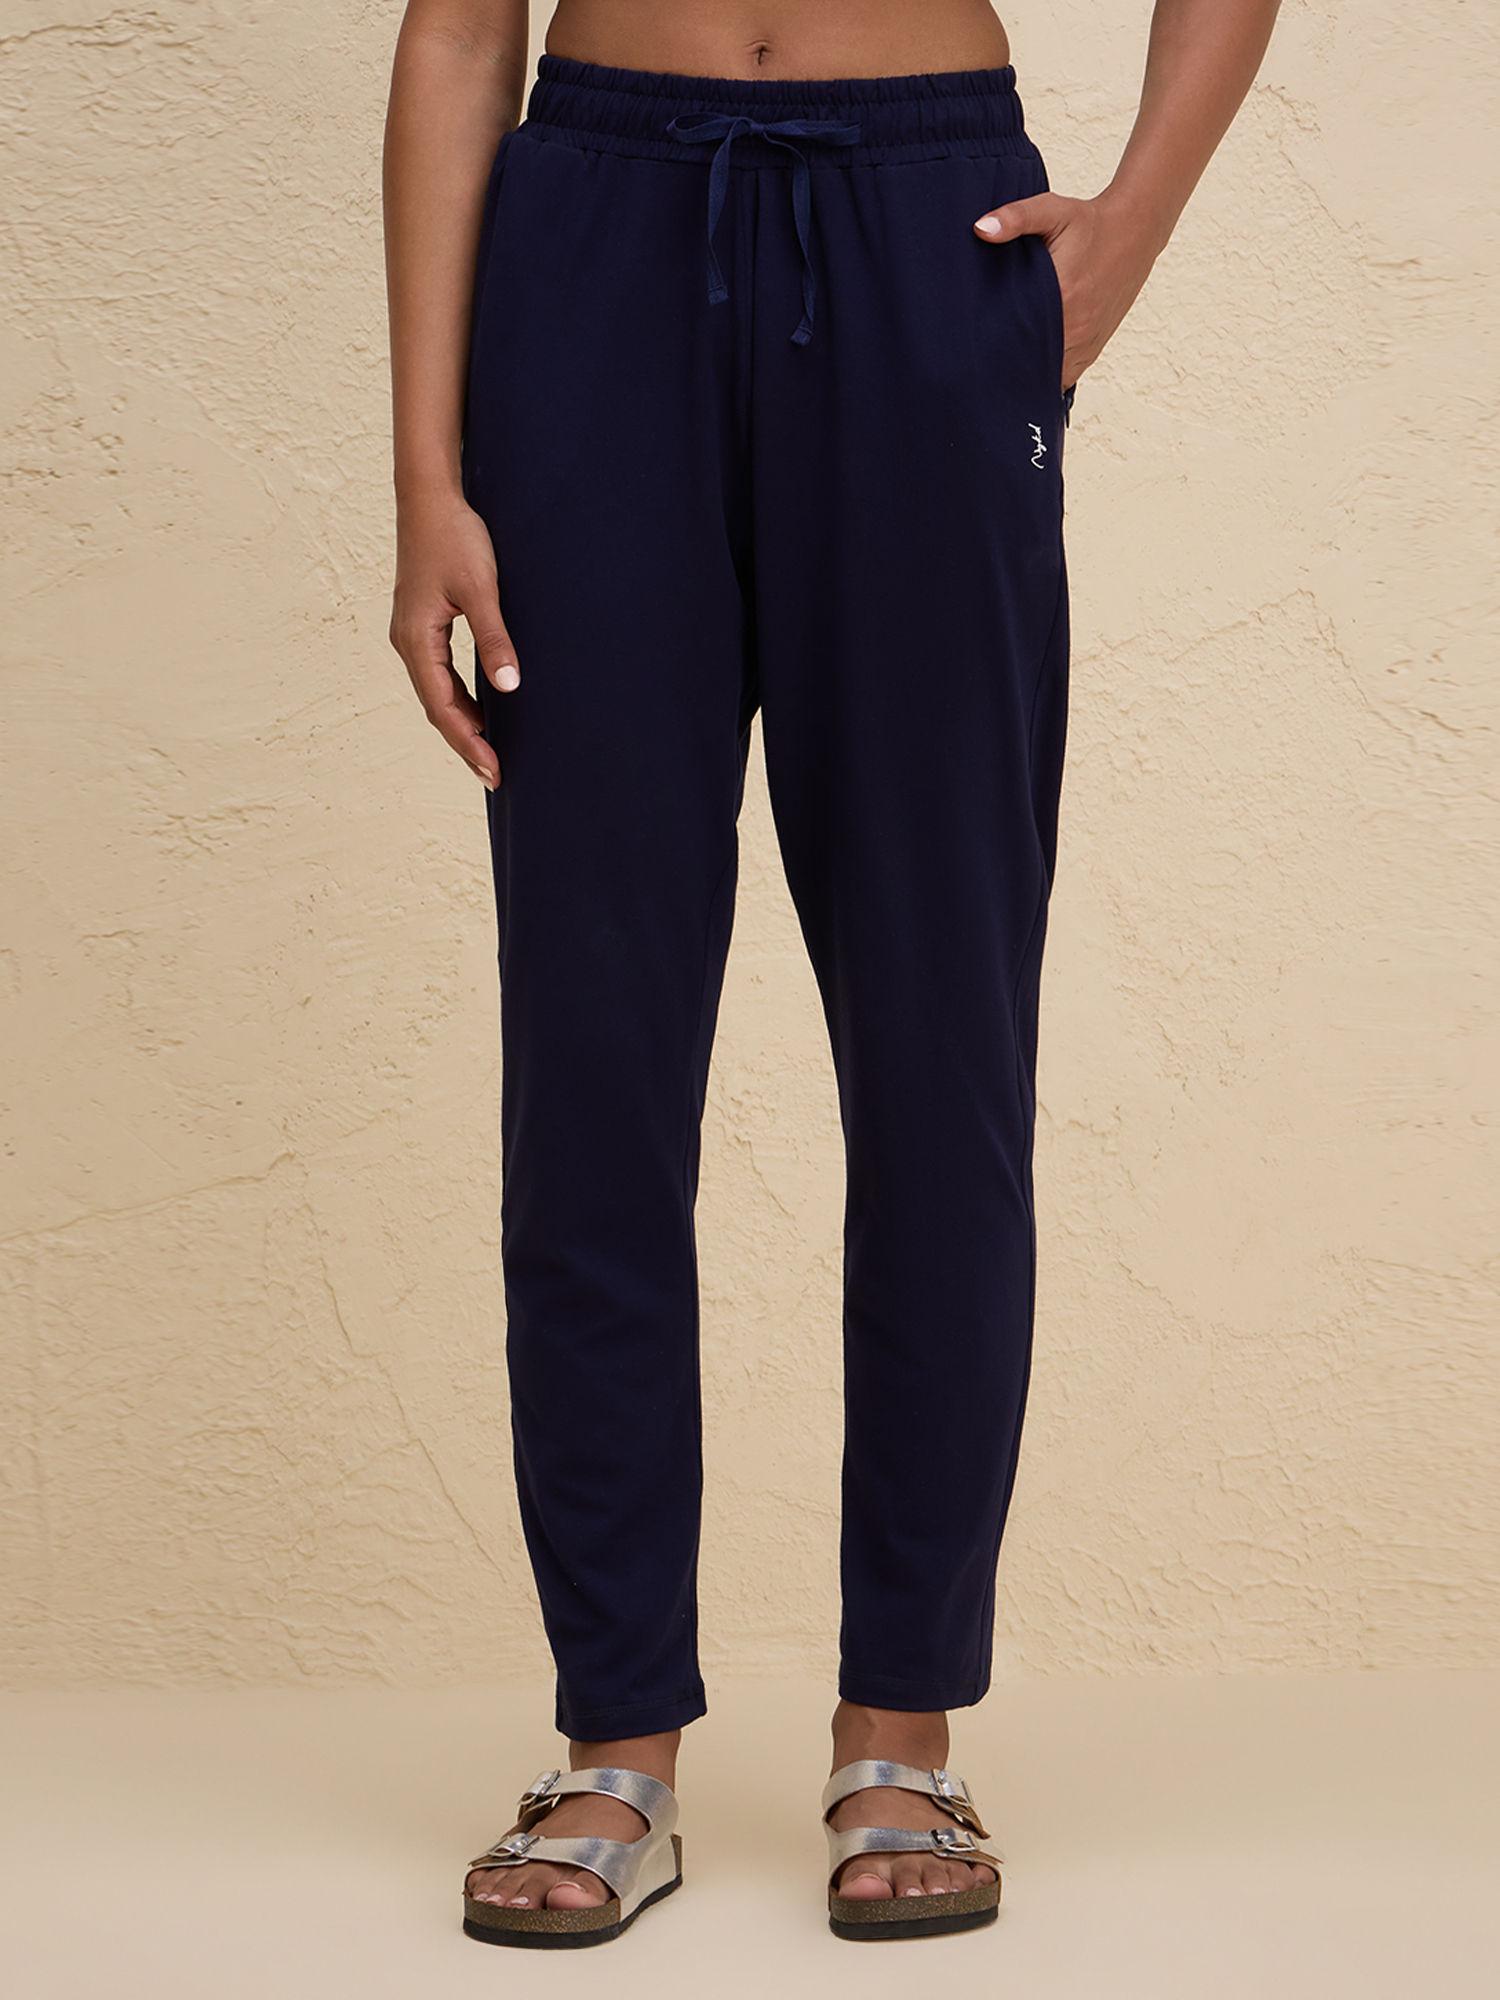 relaxed fit super comfy cotton travel pant with zip pockets-nyat502-navy